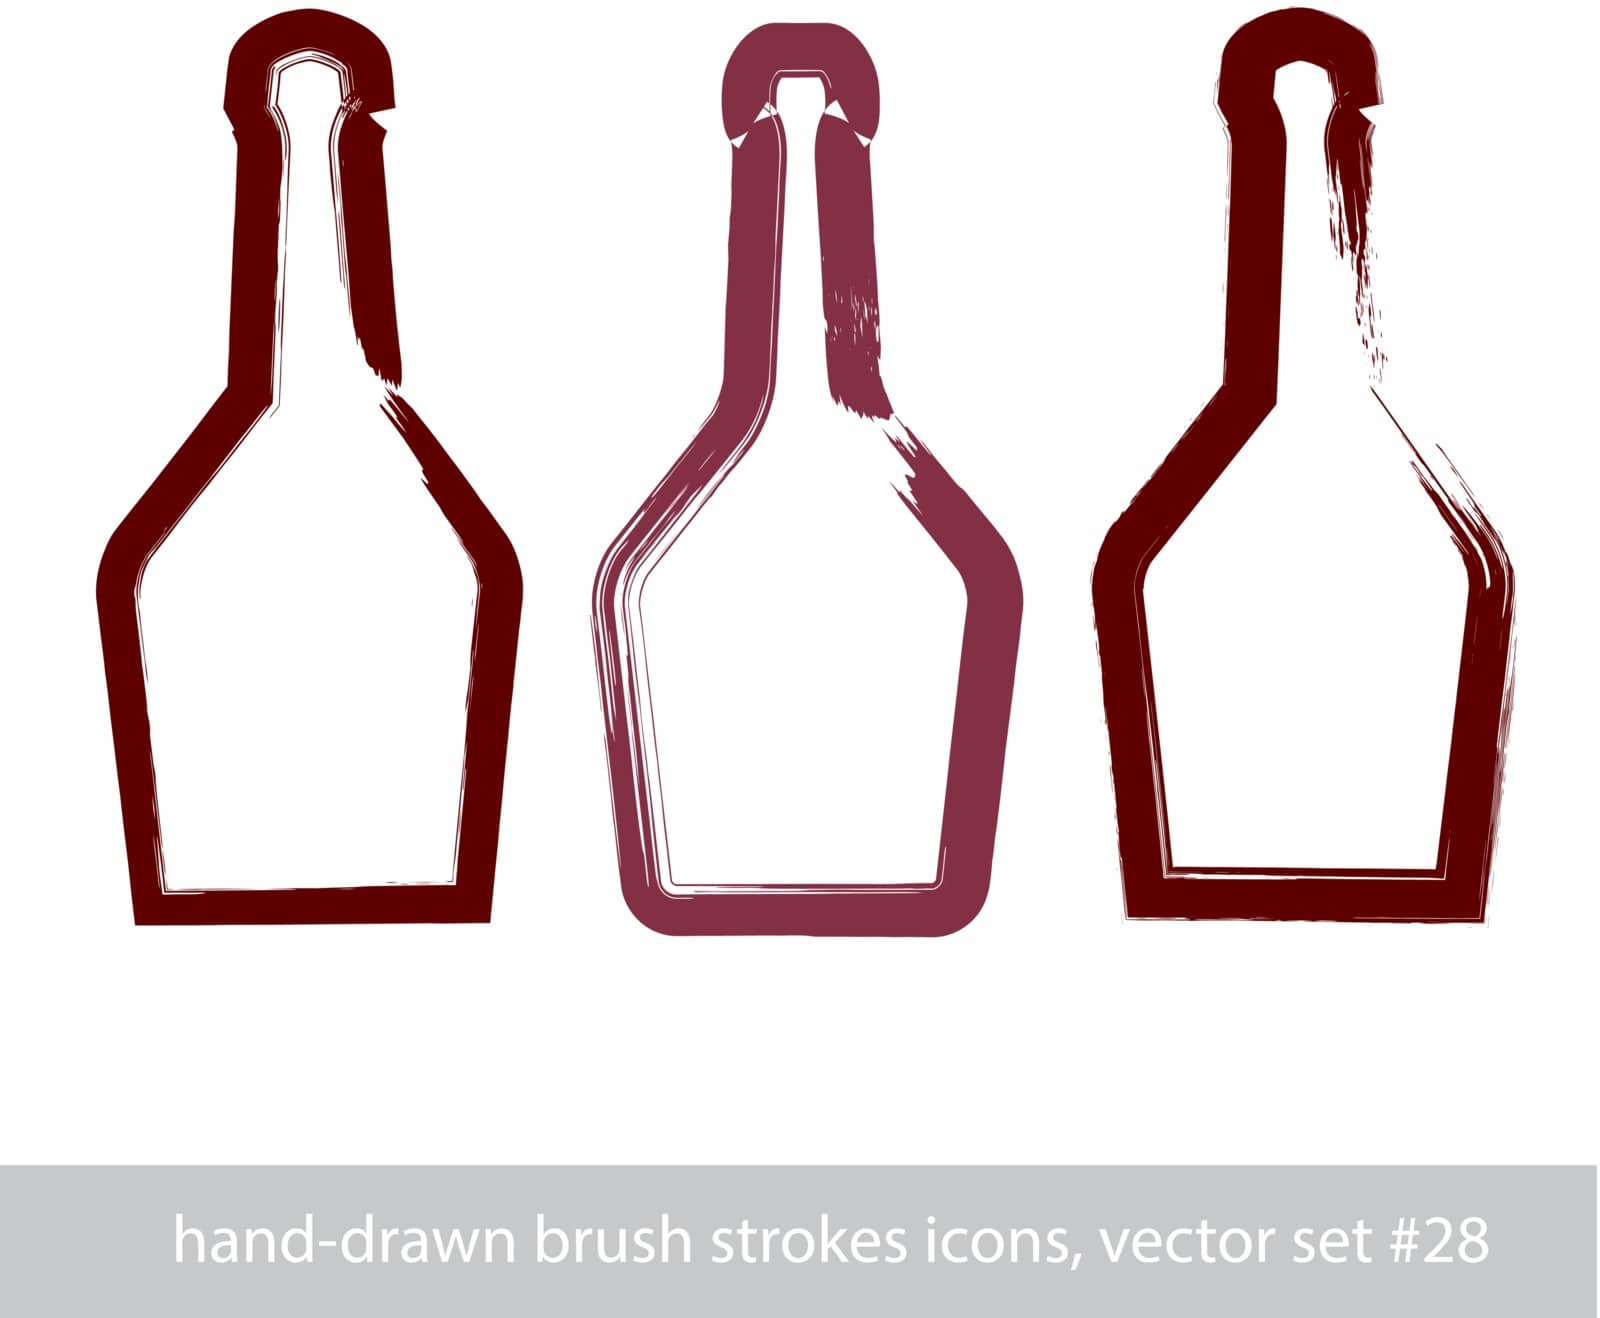 Set of hand-drawn stroke simple empty bottle of rum, symmetric brush drawing bottle icons, hand-painted silhouette of pirate bottles isolated on white background. 